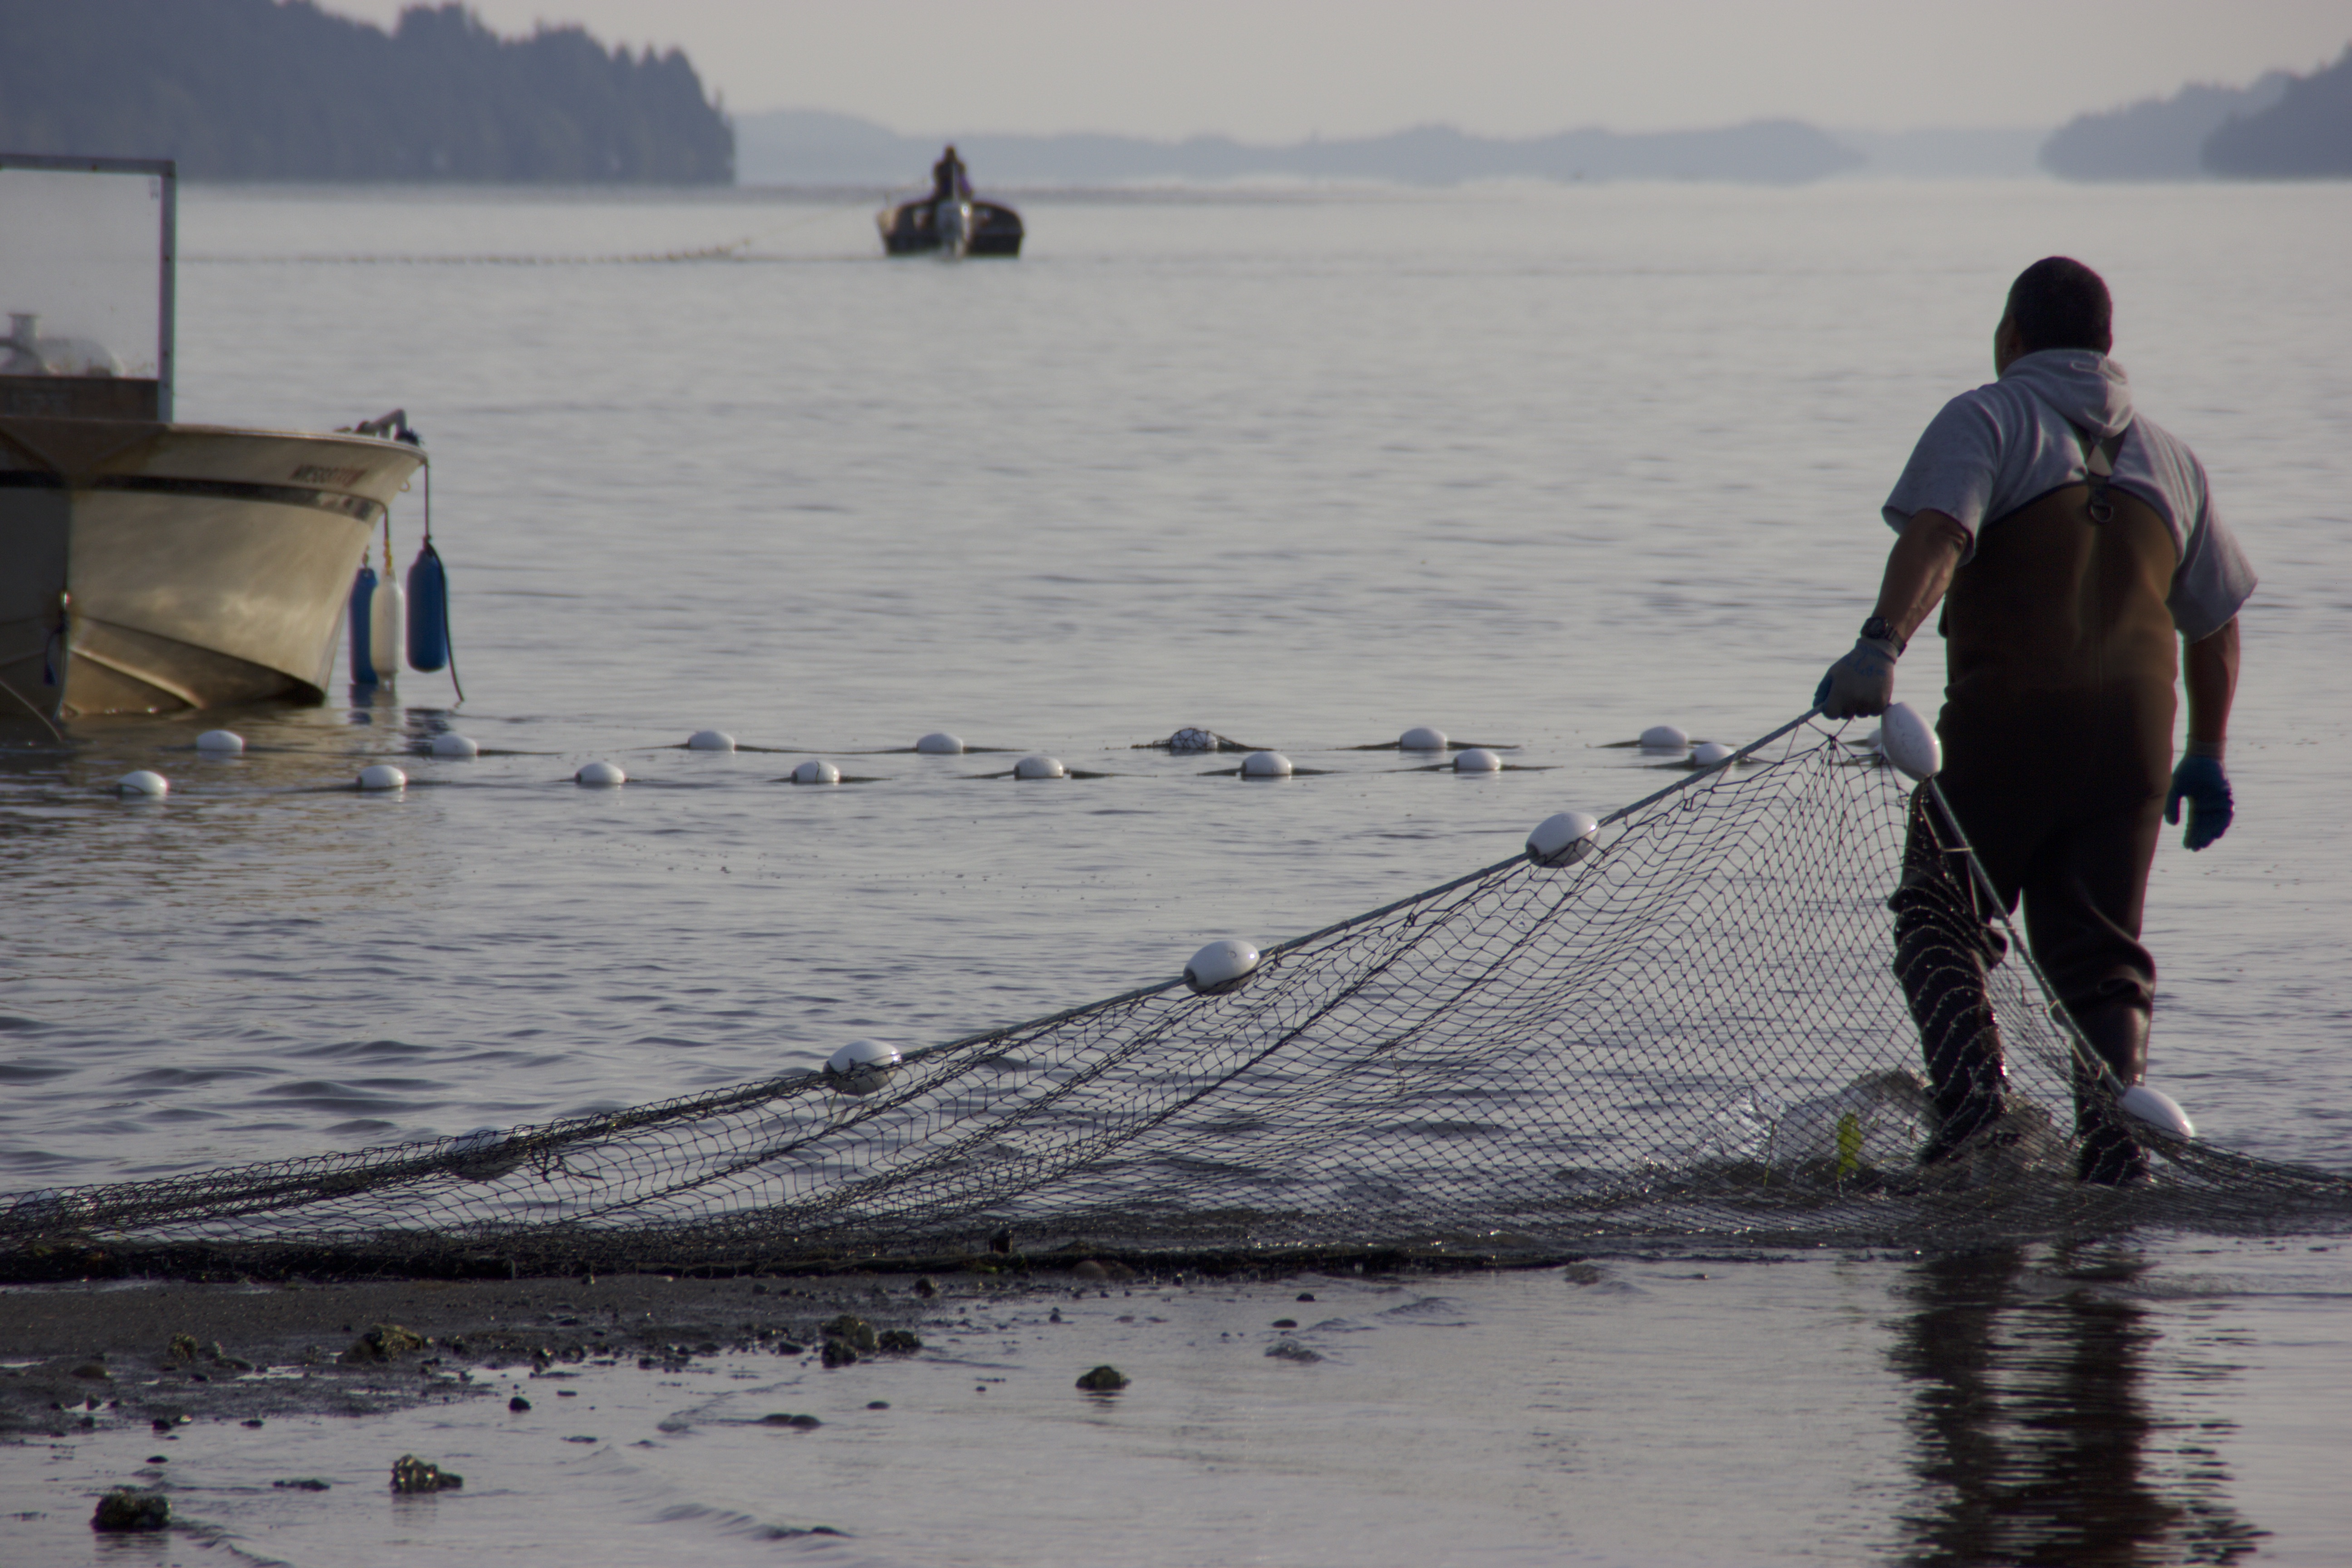 Salmon co-managers agree on Puget Sound fisheries, will work to improve season-setting process